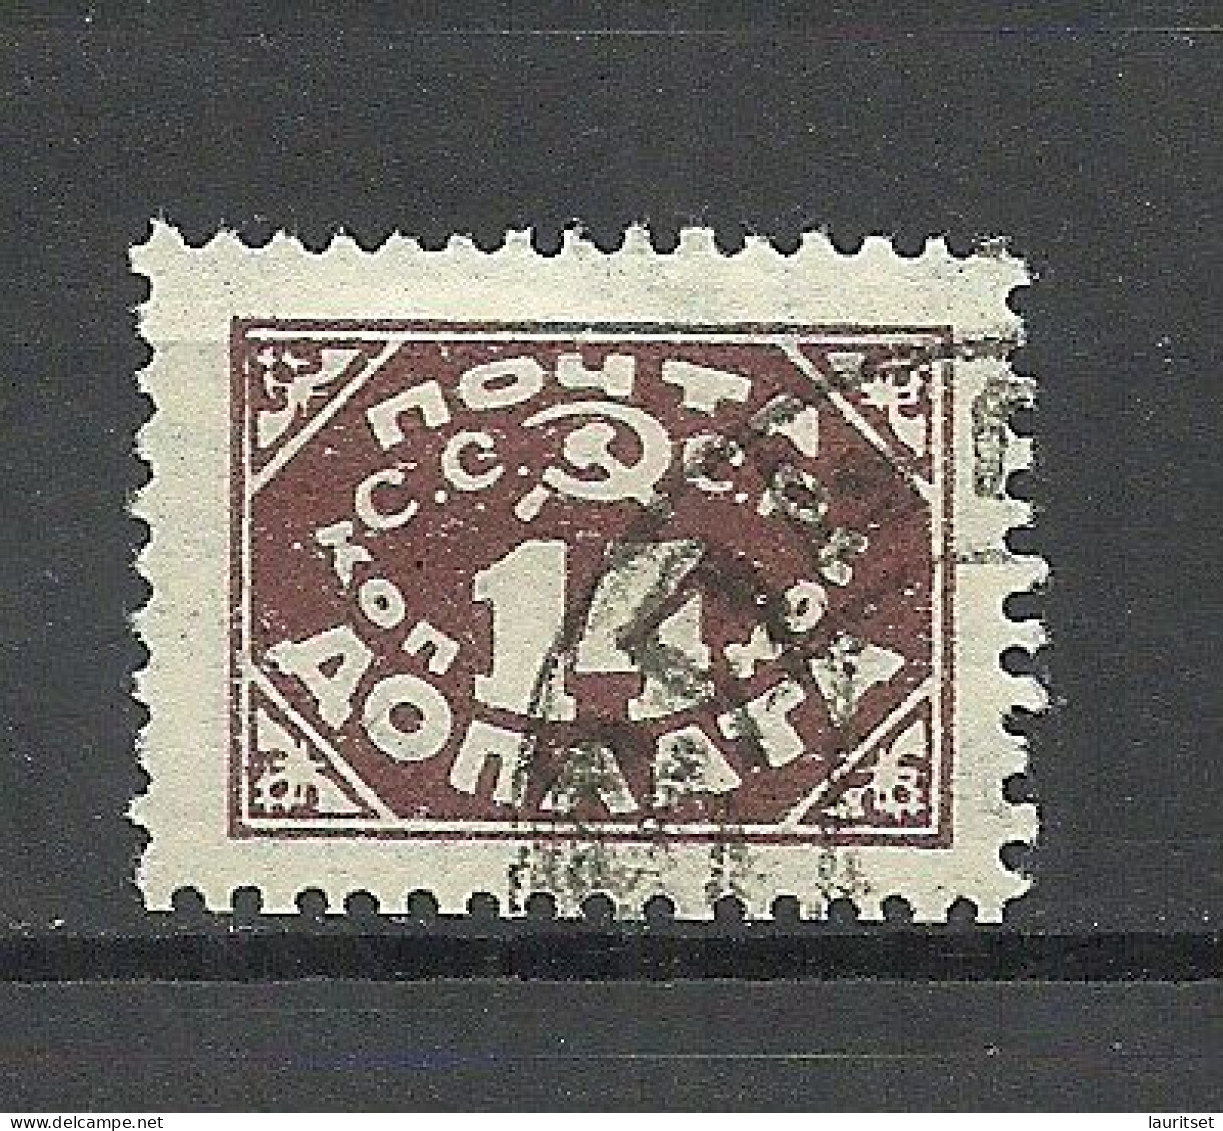 RUSSLAND RUSSIA 1925 Porto Postage Due Michel 17, Watermarked, Perf 12 O - Postage Due